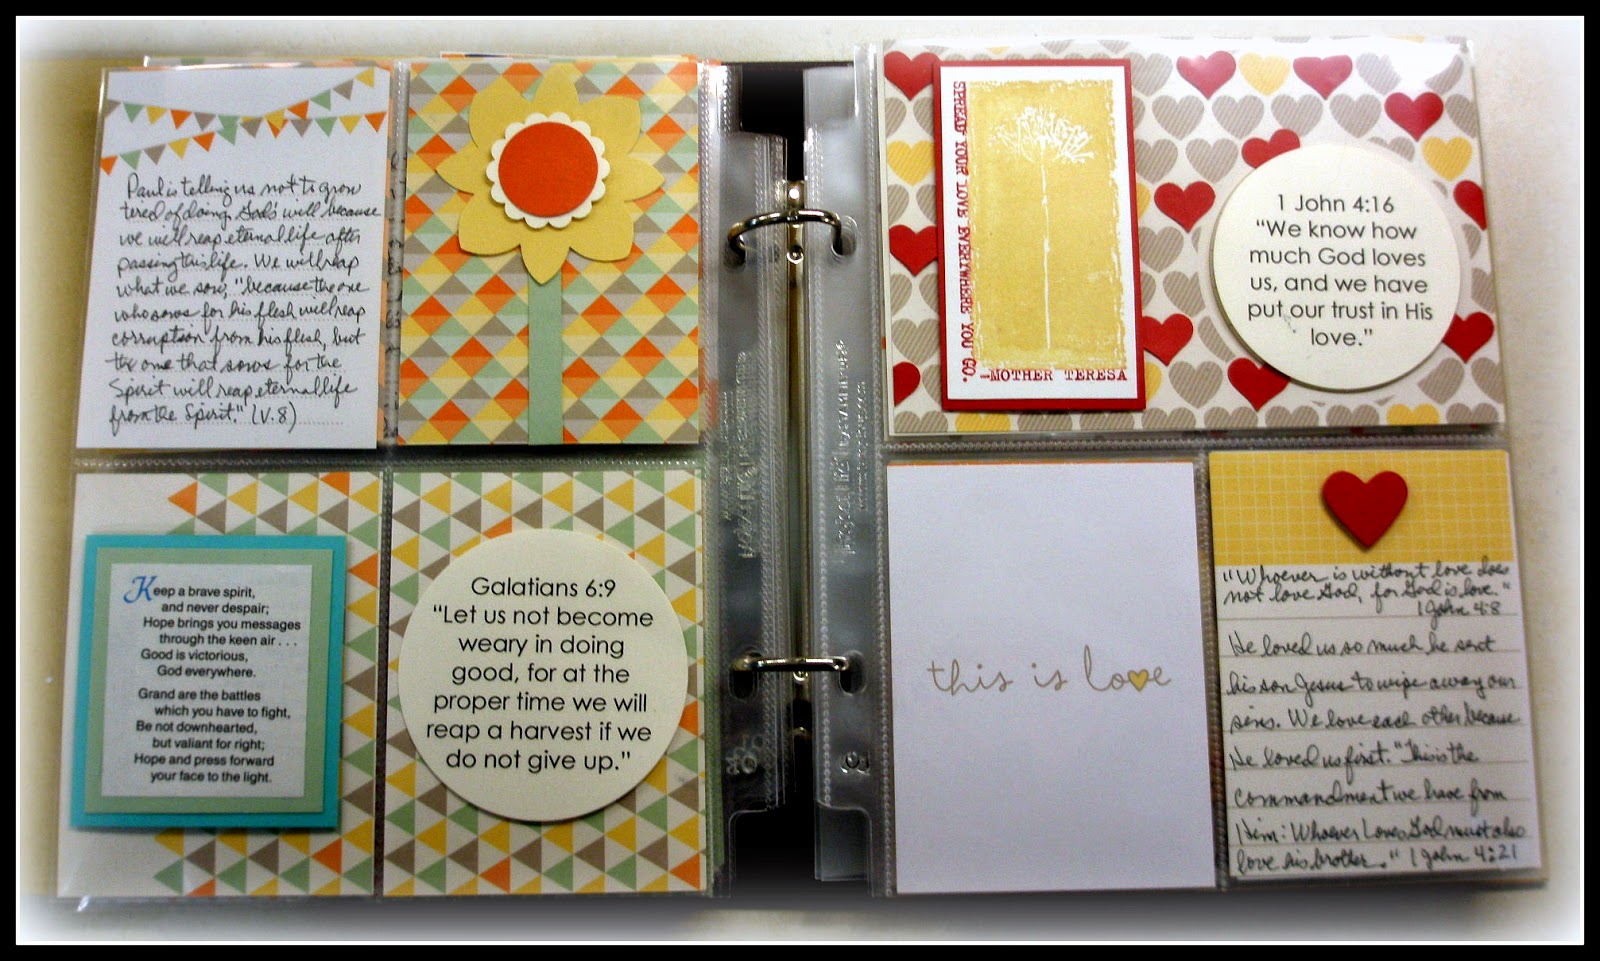 Another Chance to Stamp: STAMPIN' UP PROJECT LIFE MEETS FAITH